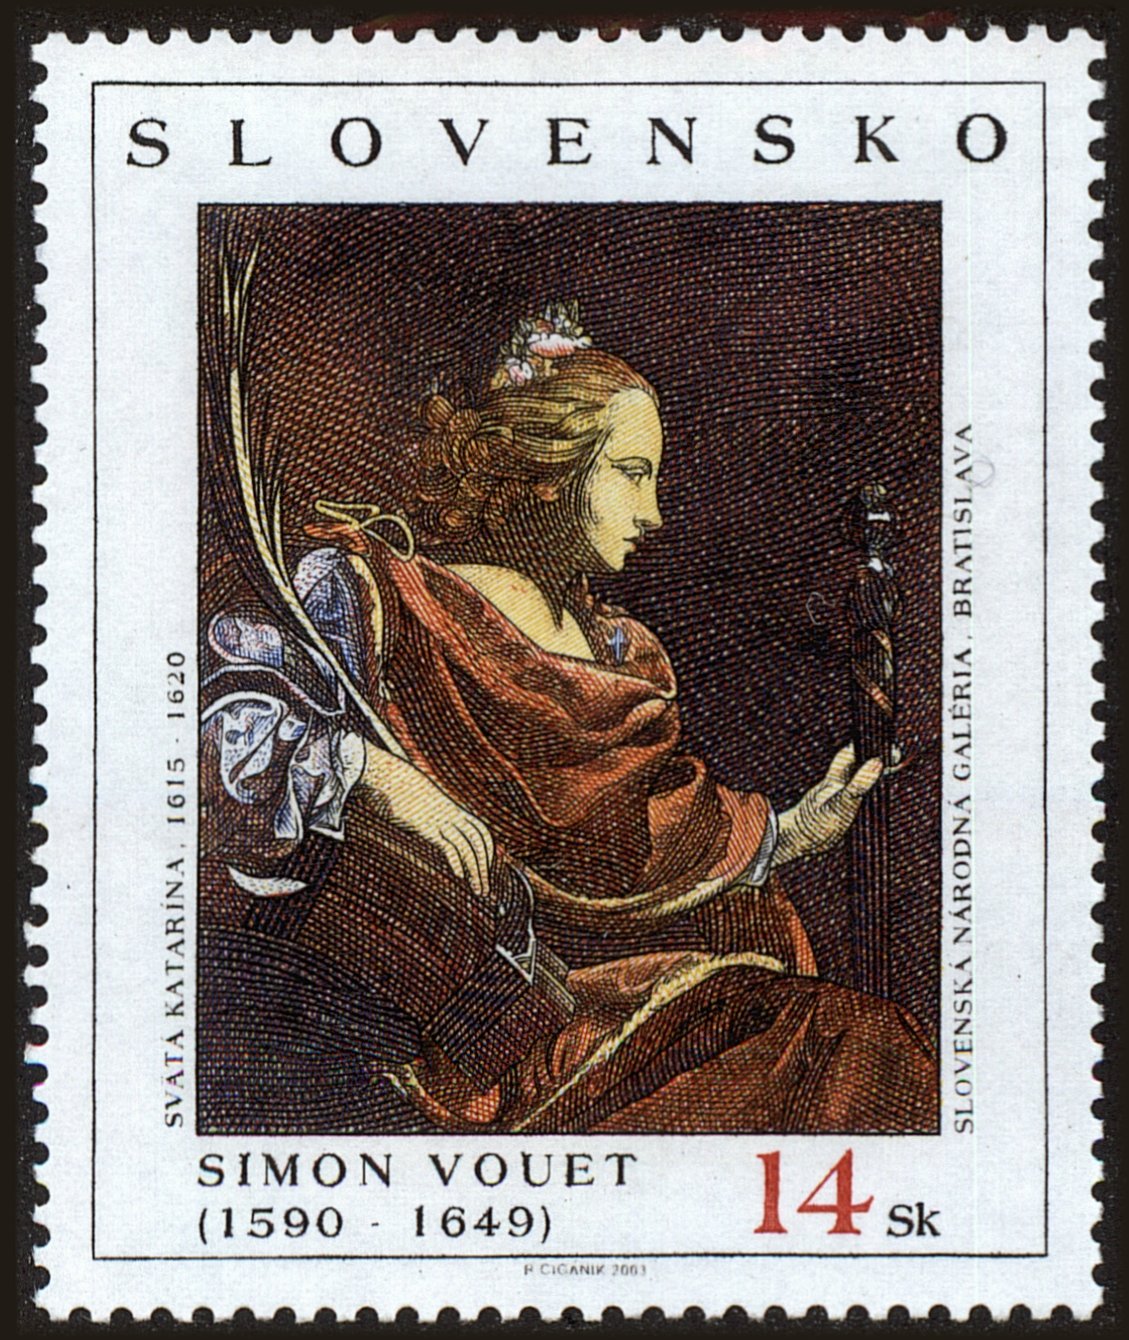 Front view of Slovakia 443 collectors stamp